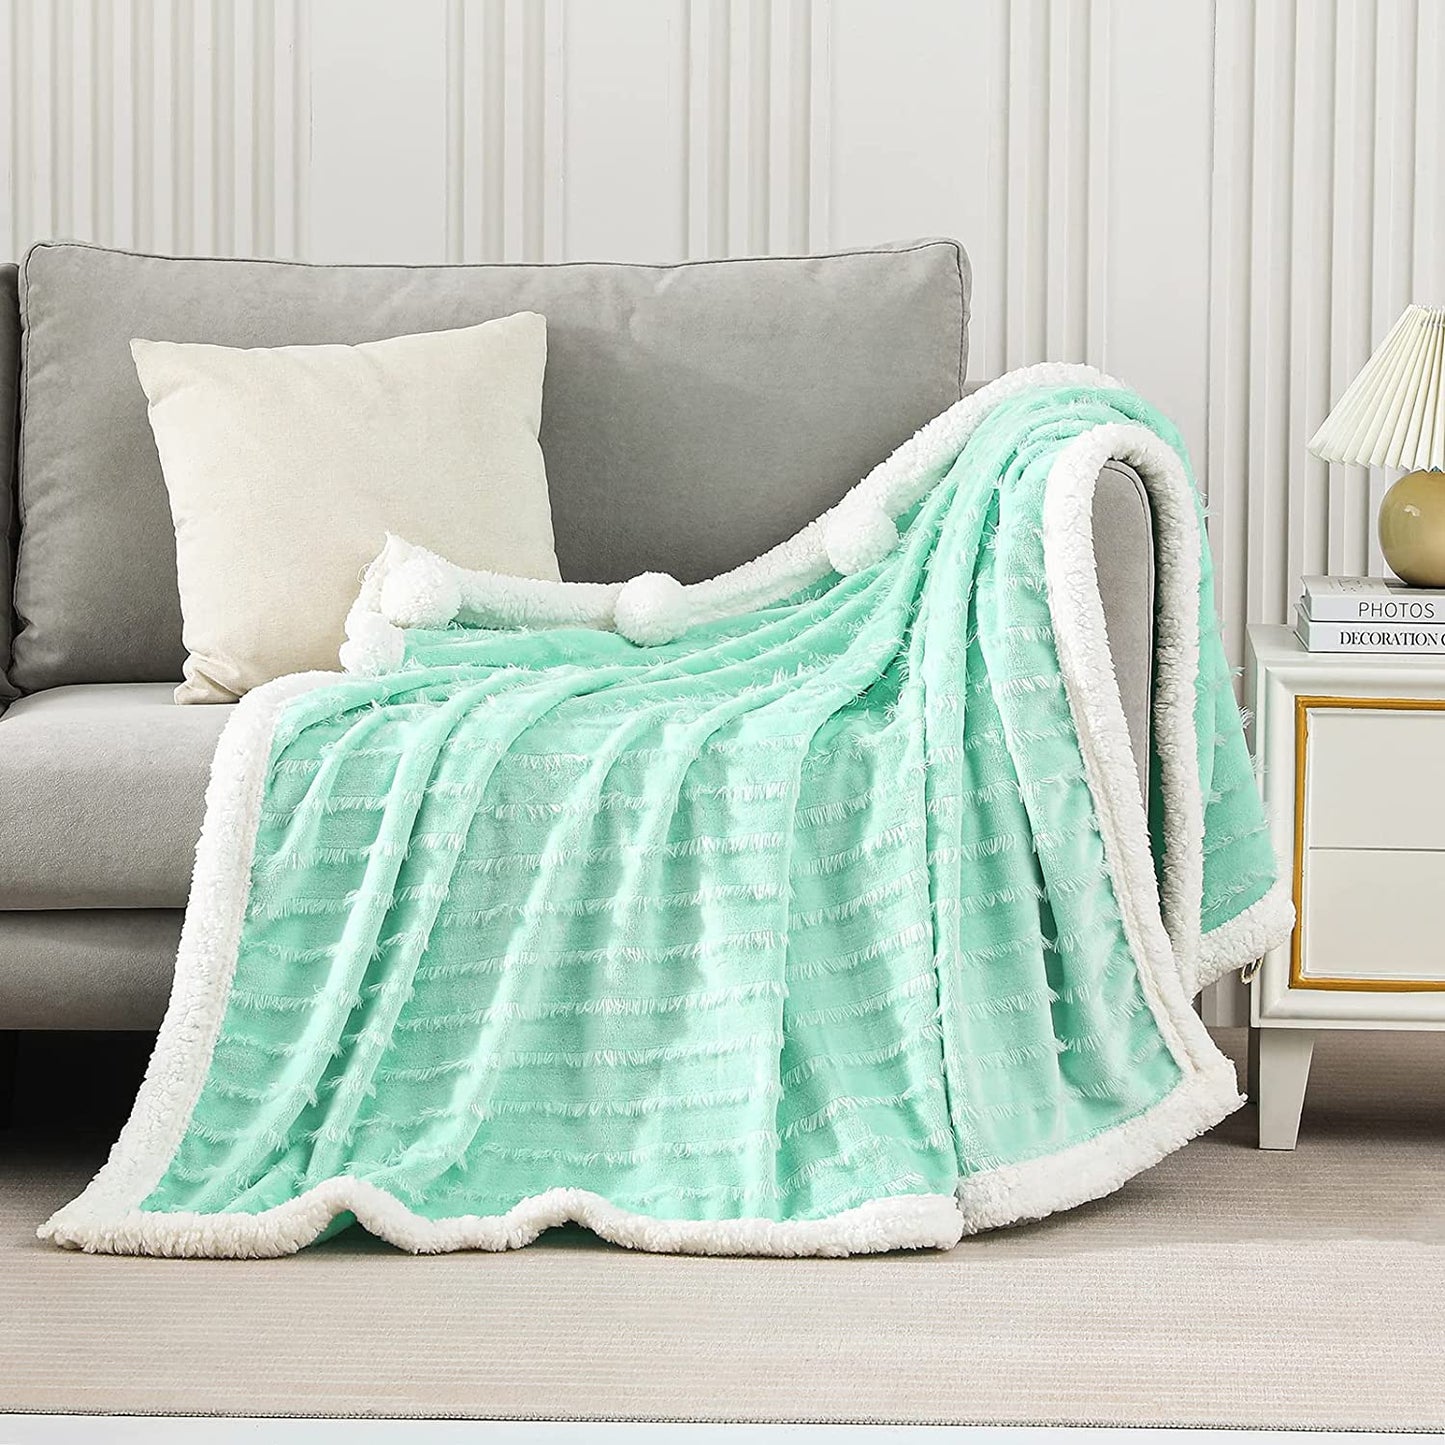 Exclusivo Mezcla Wearable Throw Blanket Soft Wrap Throw Cloak Blanket Poncho Ultra Soft Cozy Oversize Blanket Warm for Winter ( 50x72 Inches, Light Green)